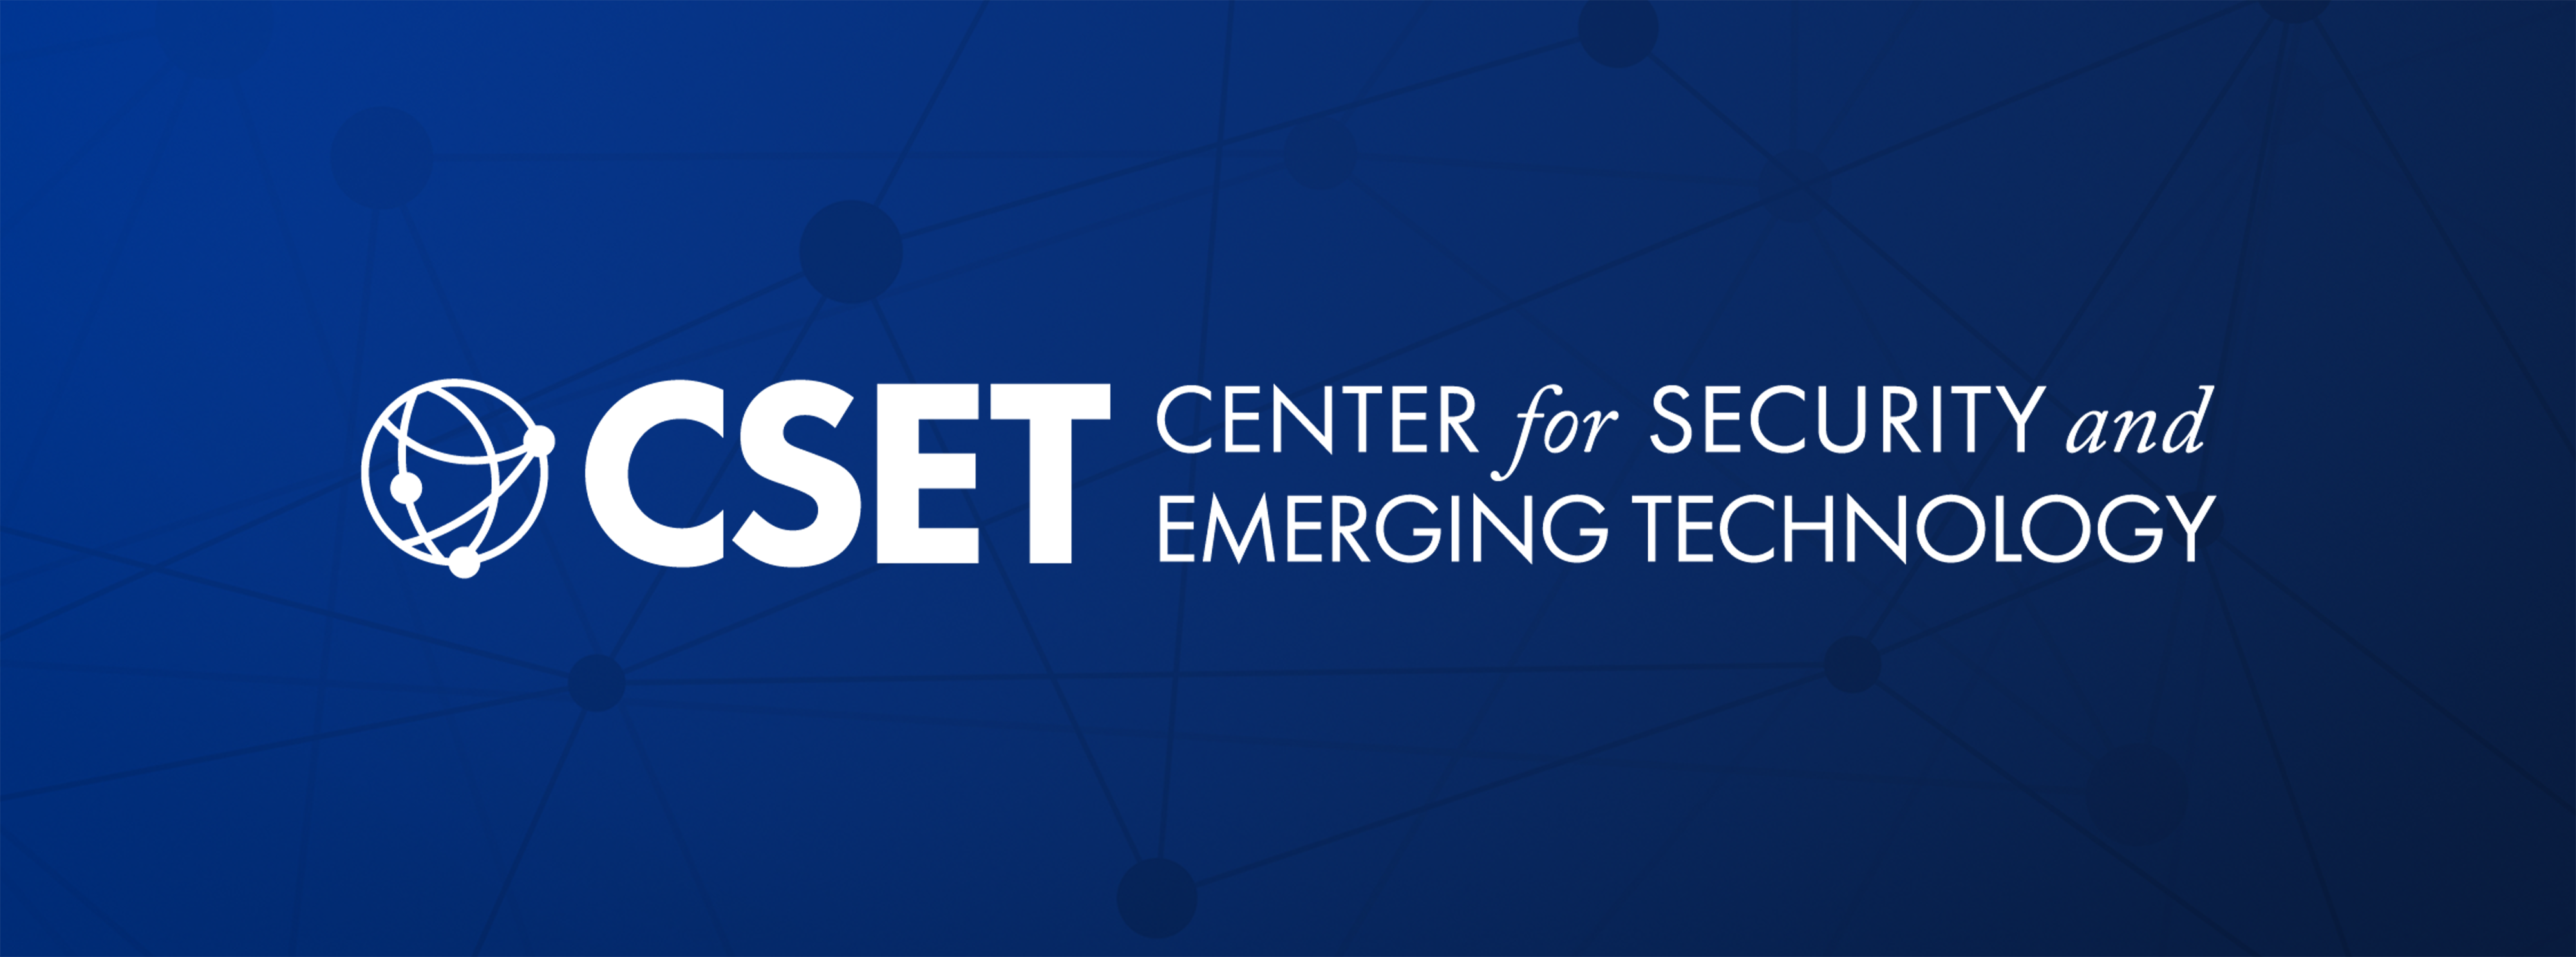 A wide banner with a dark blue gradient background featuring the logo of the Center for Security and Emerging Technology (CSET) in white lettering.